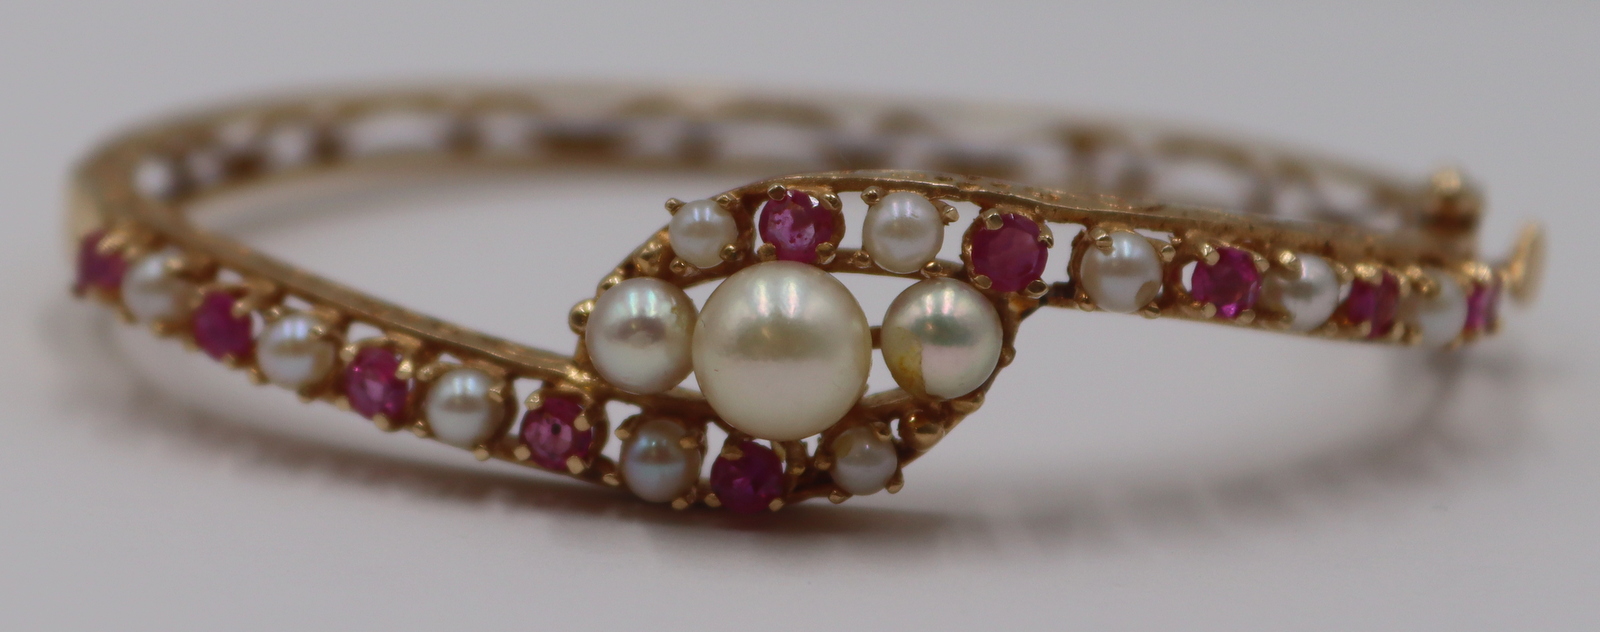 JEWELRY 14KT GOLD PEARL AND 3bcbe6